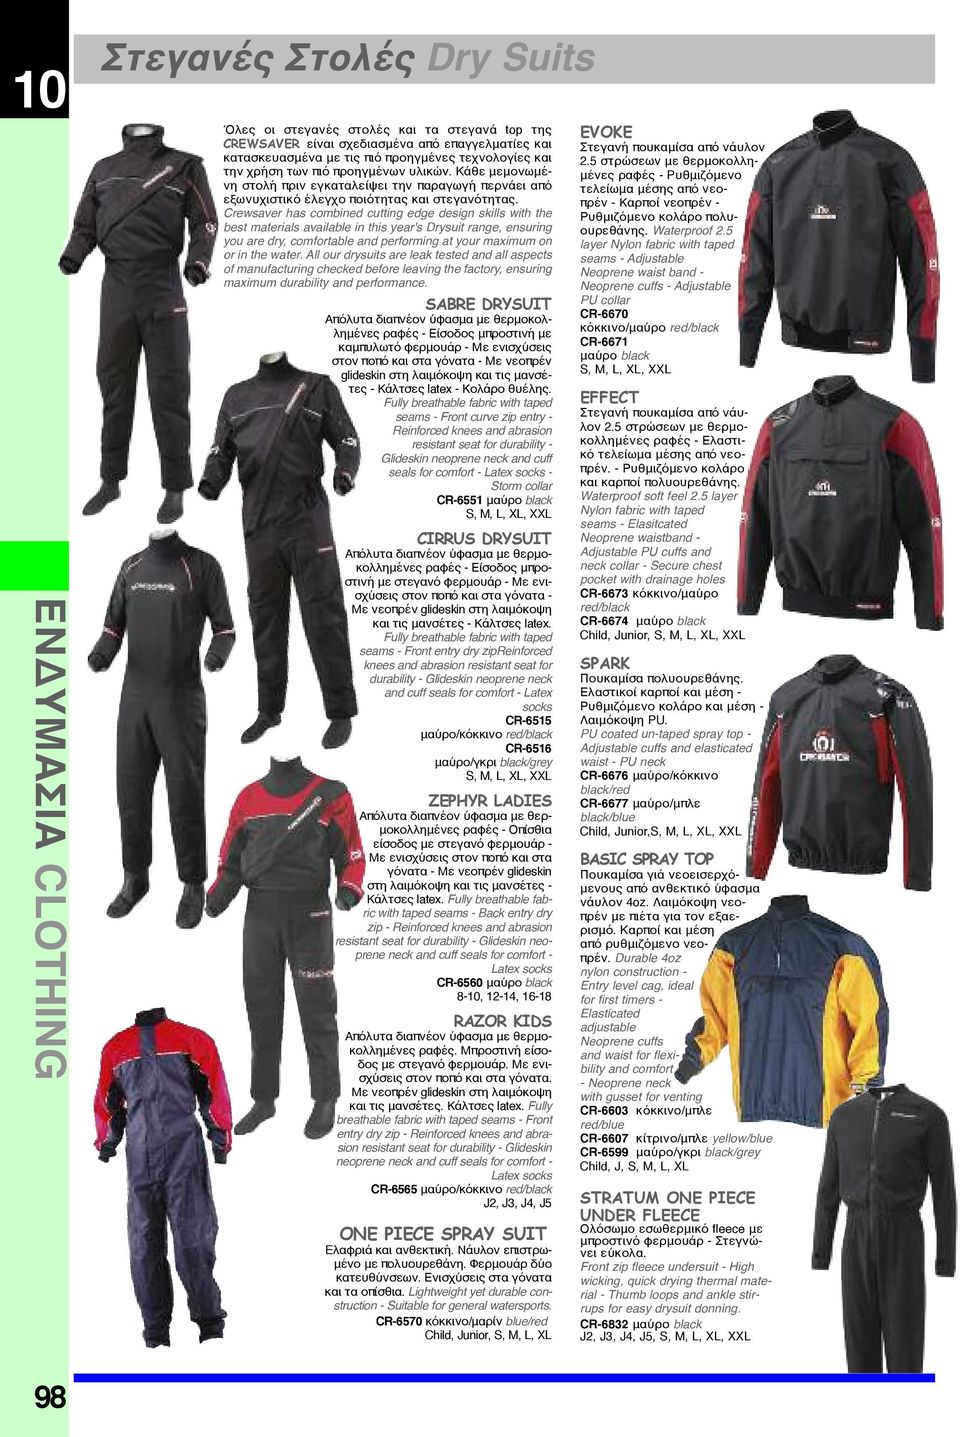 Crewsaver has combined cutting edge design skills with the best materials available in this year's Drysuit range, ensuring you are dry, comfortable and performing at your maximum on or in the water.